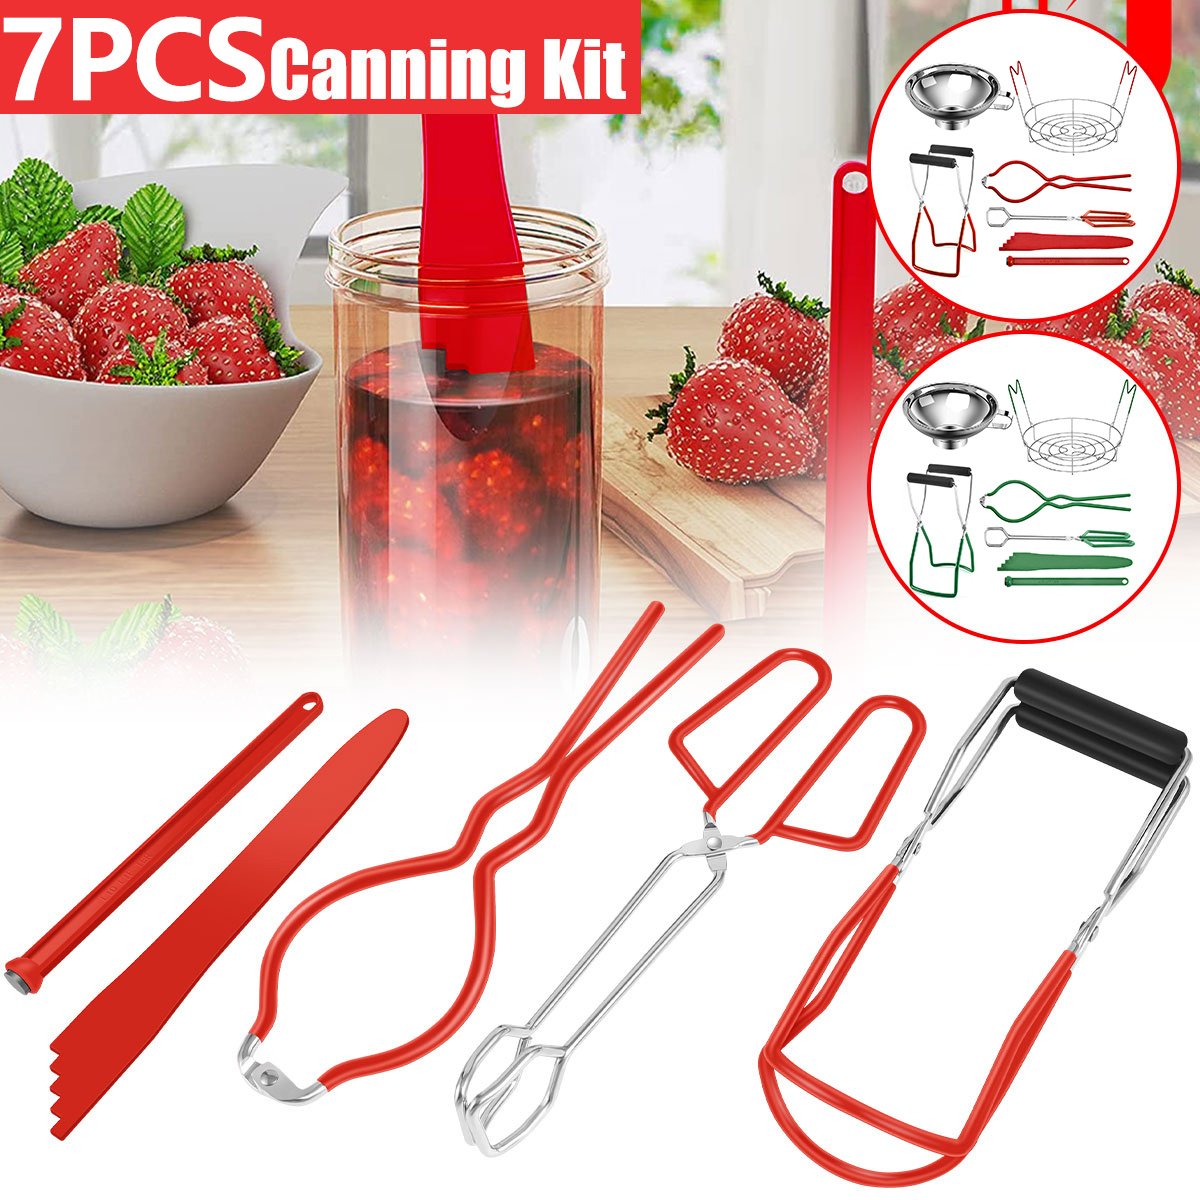 Canning Supplies Starter Kit, All-in-one Canning Kit for Beginners - Food  Grade Stainless Steel Canning Tools, Home Canning Set Canning Accessories